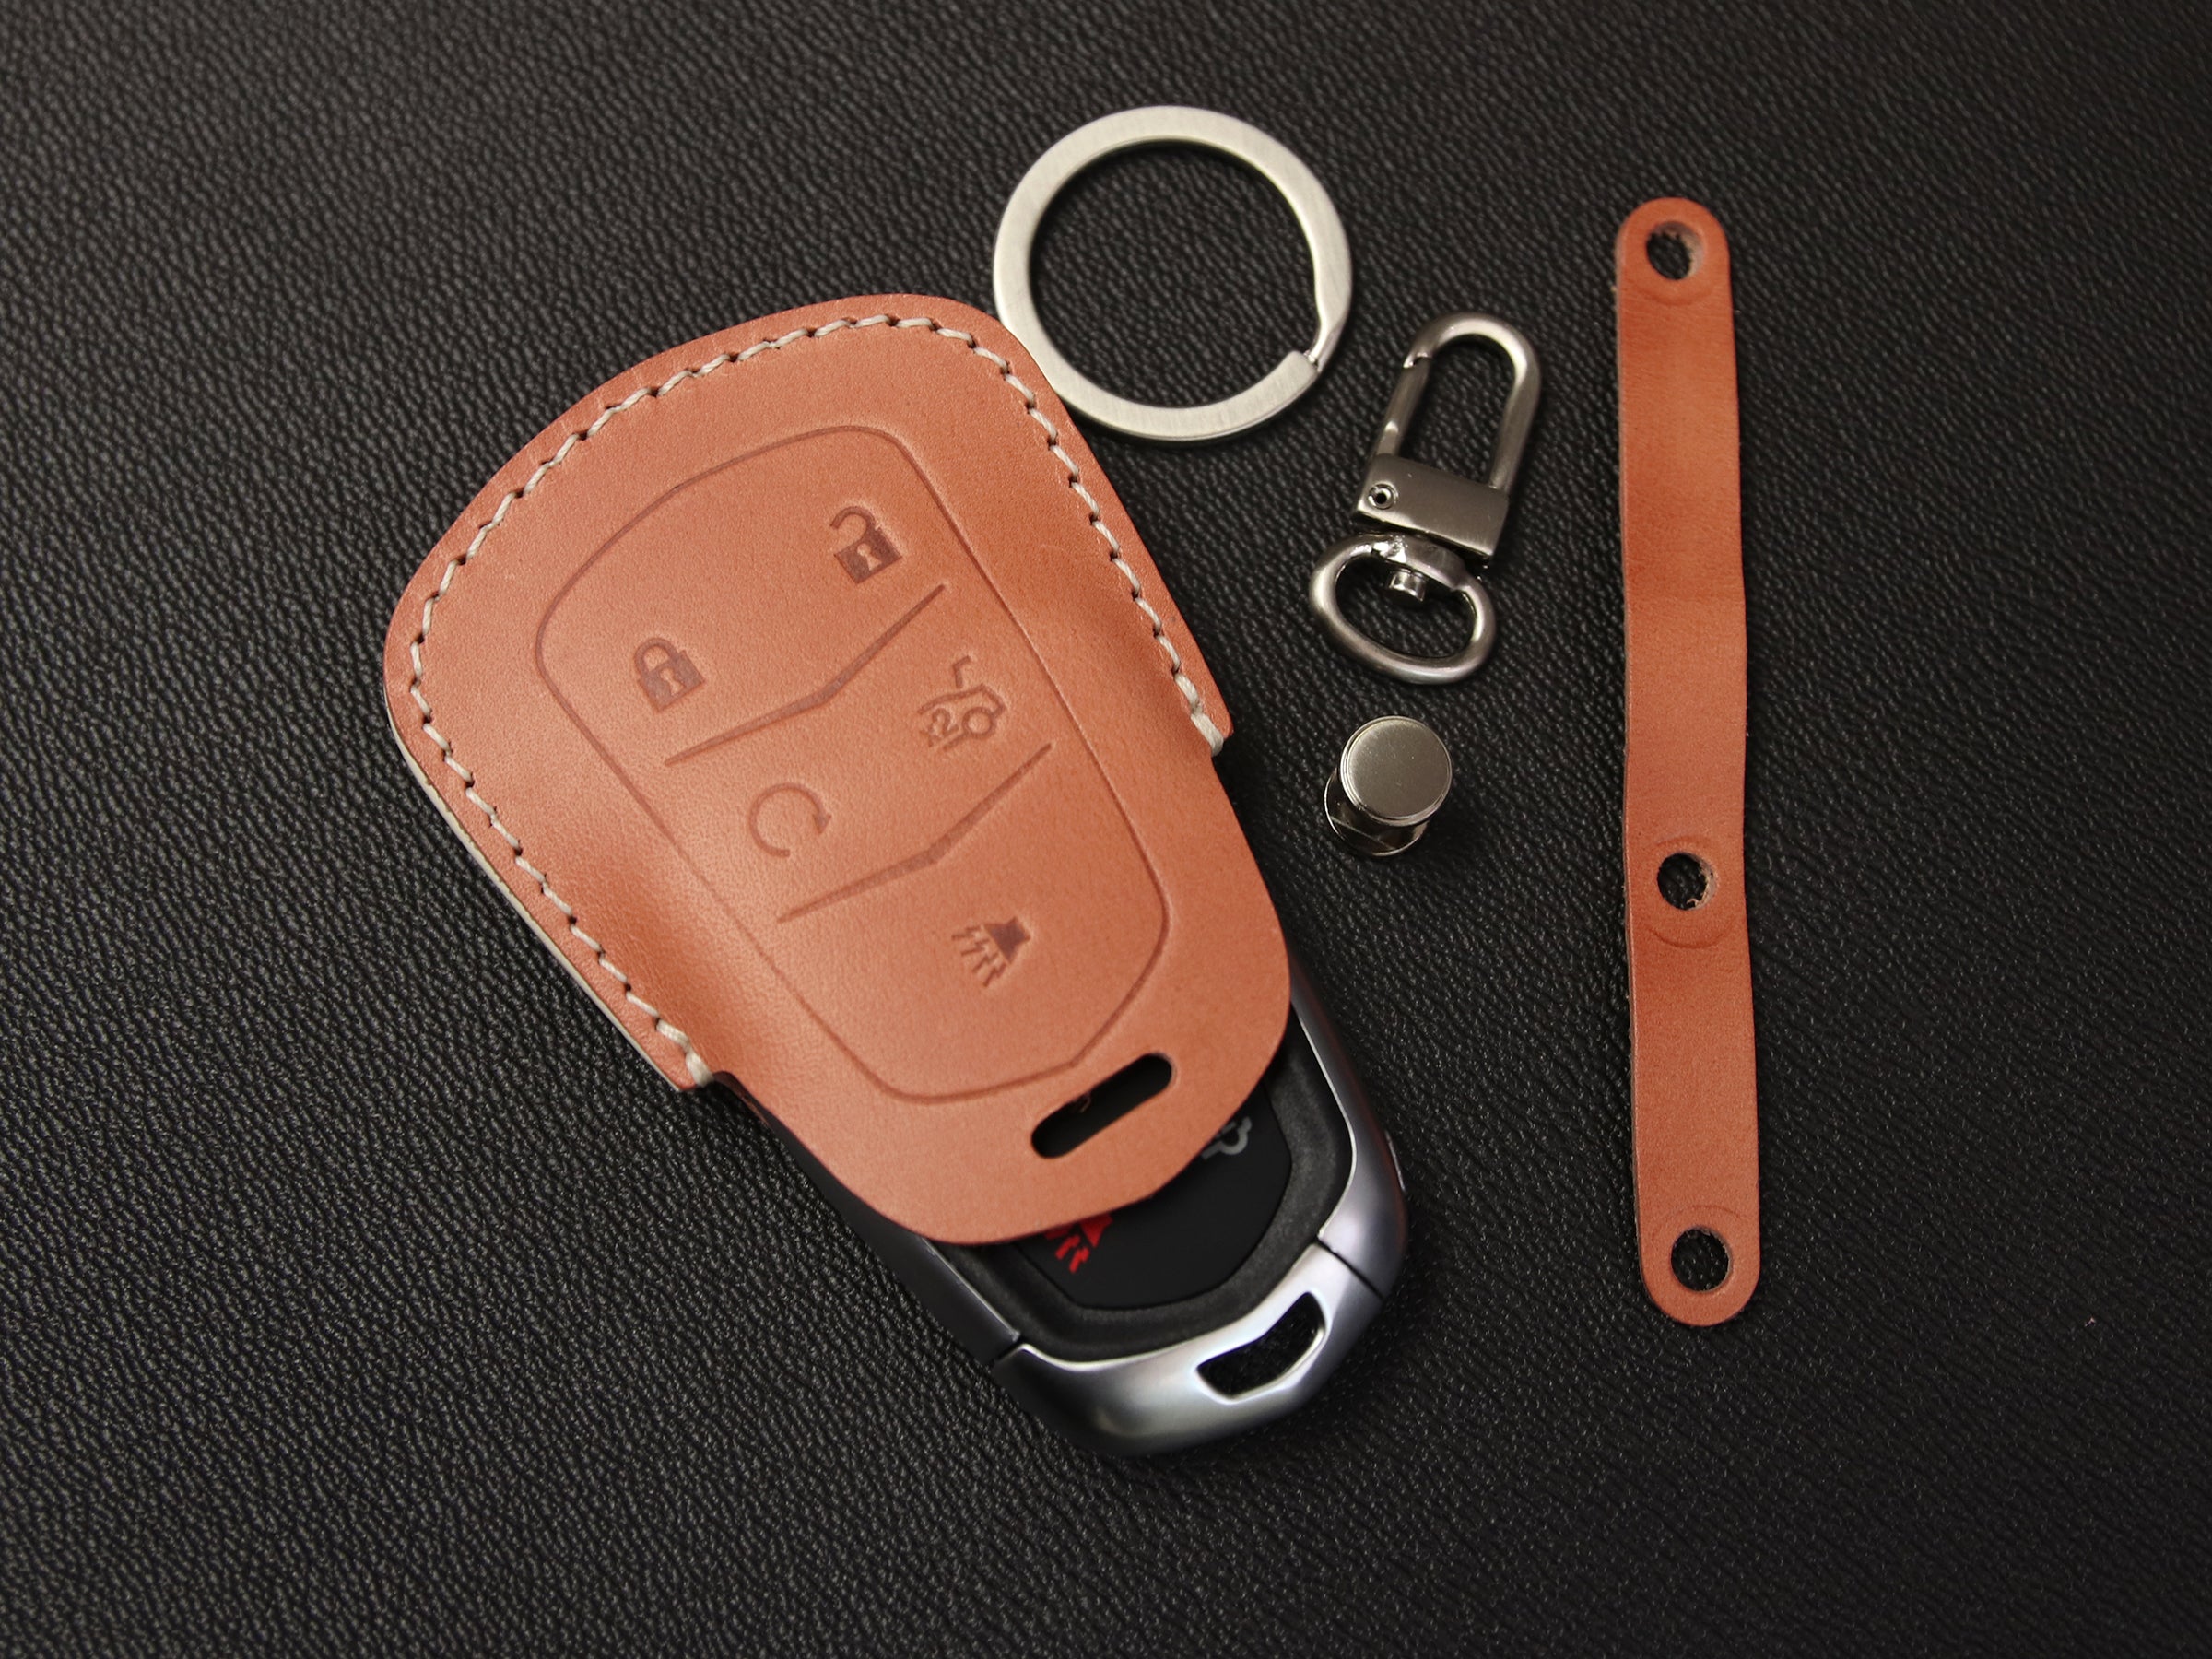 Cadillac [1-5B] Key Fob Leather Case For Escalade, cts, SRX, XT5, ATS, STS, CT6 - Italian Veg-Tanned Leather -5 Buttons